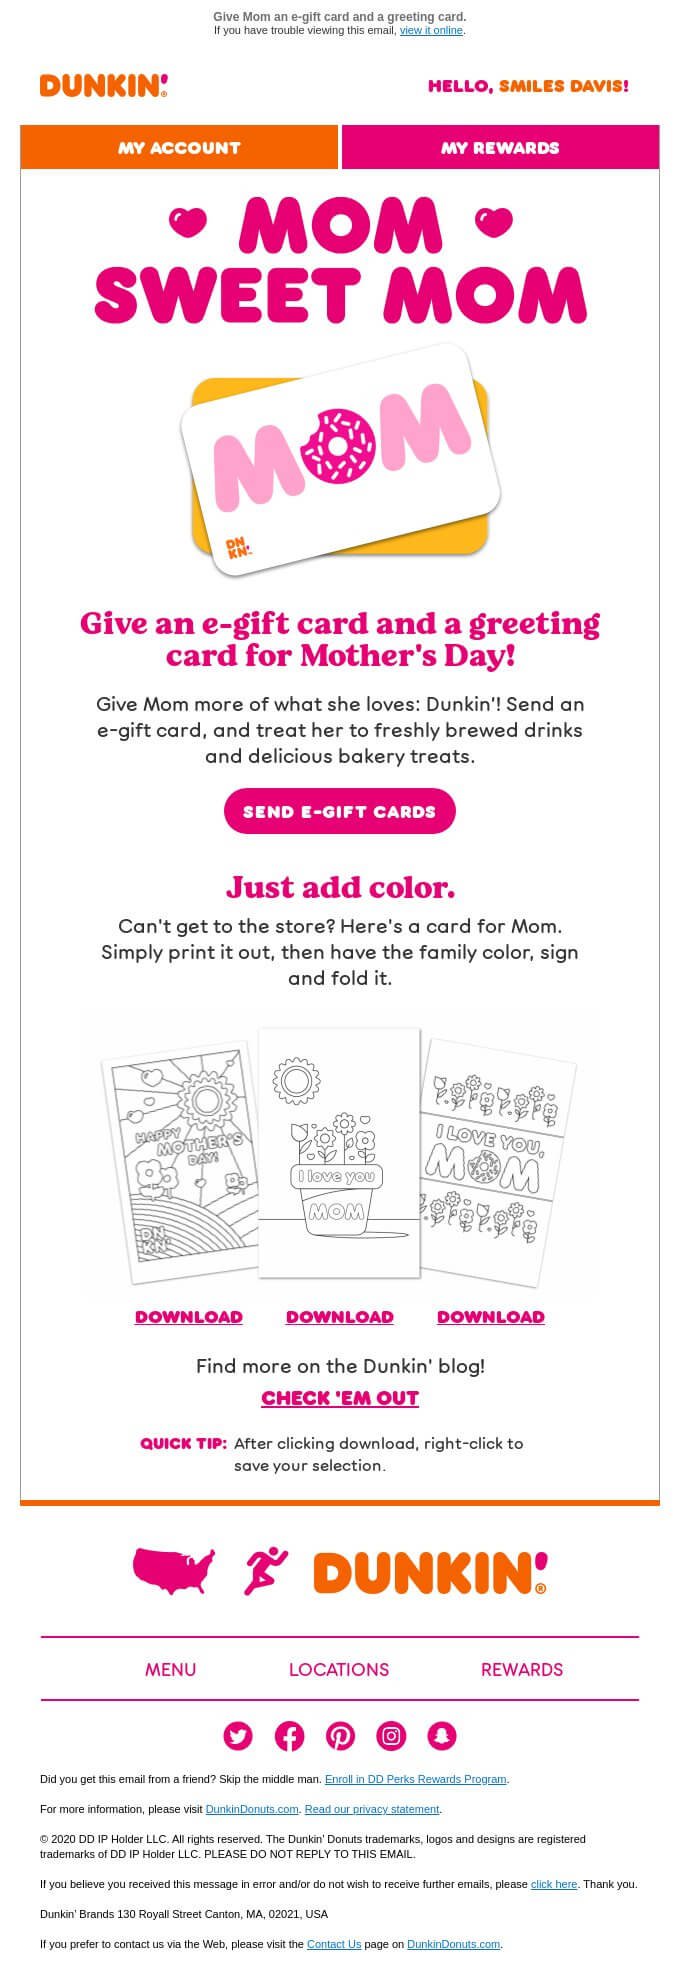 dunkin-donuts-mothers-day-email-example